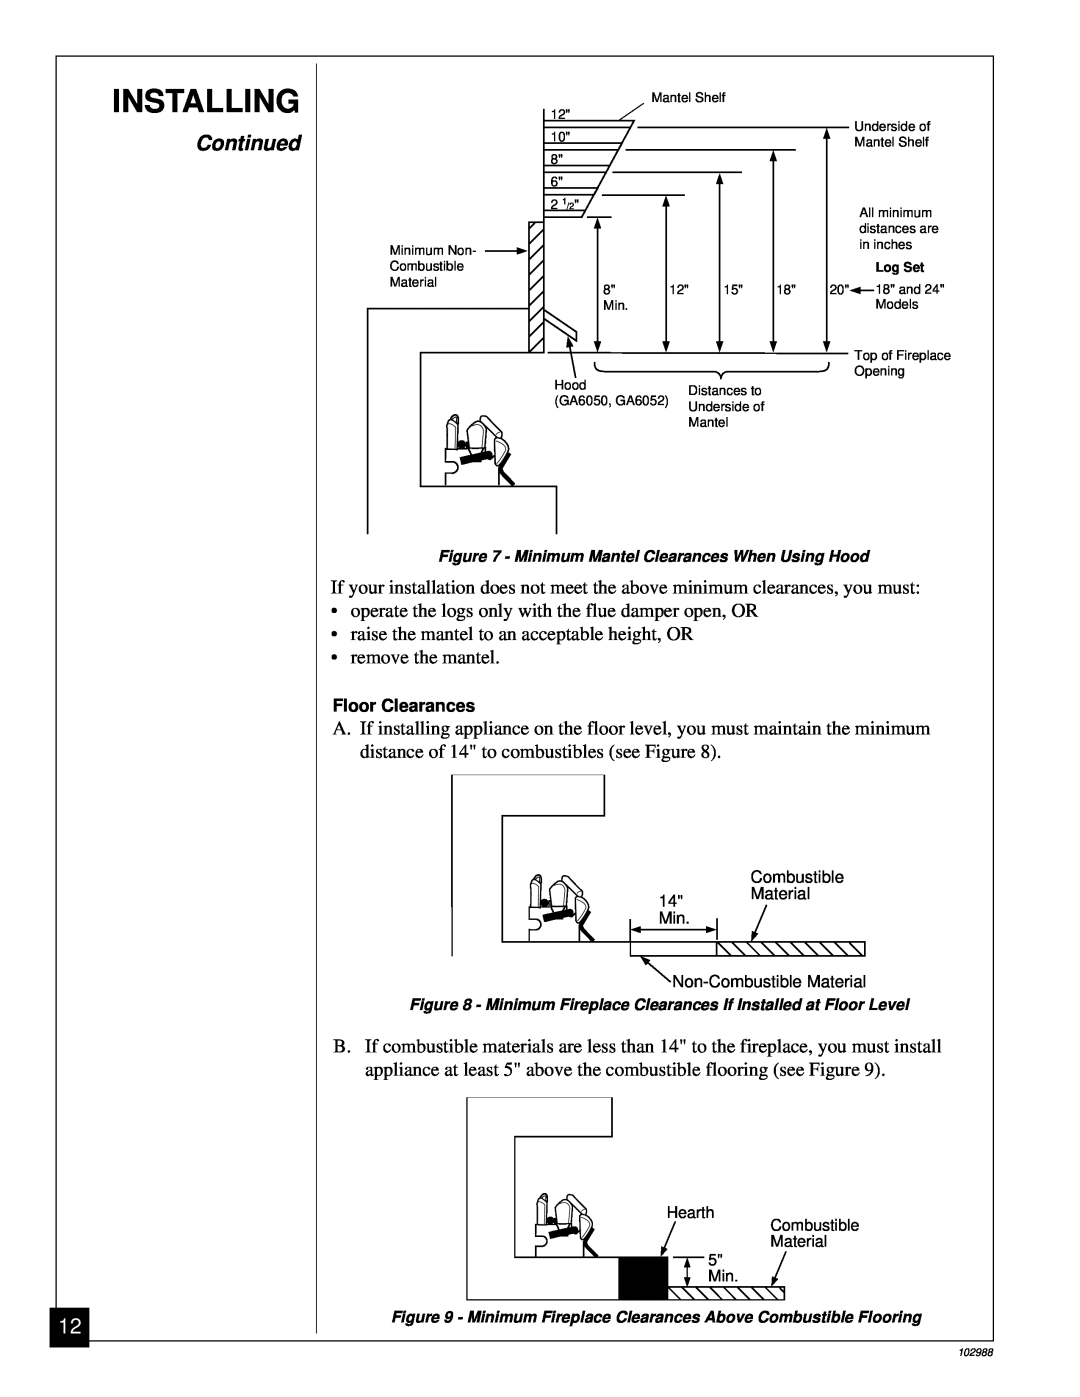 Desa CGS2718N installation manual Installing, Continued, raise the mantel to an acceptable height, OR 